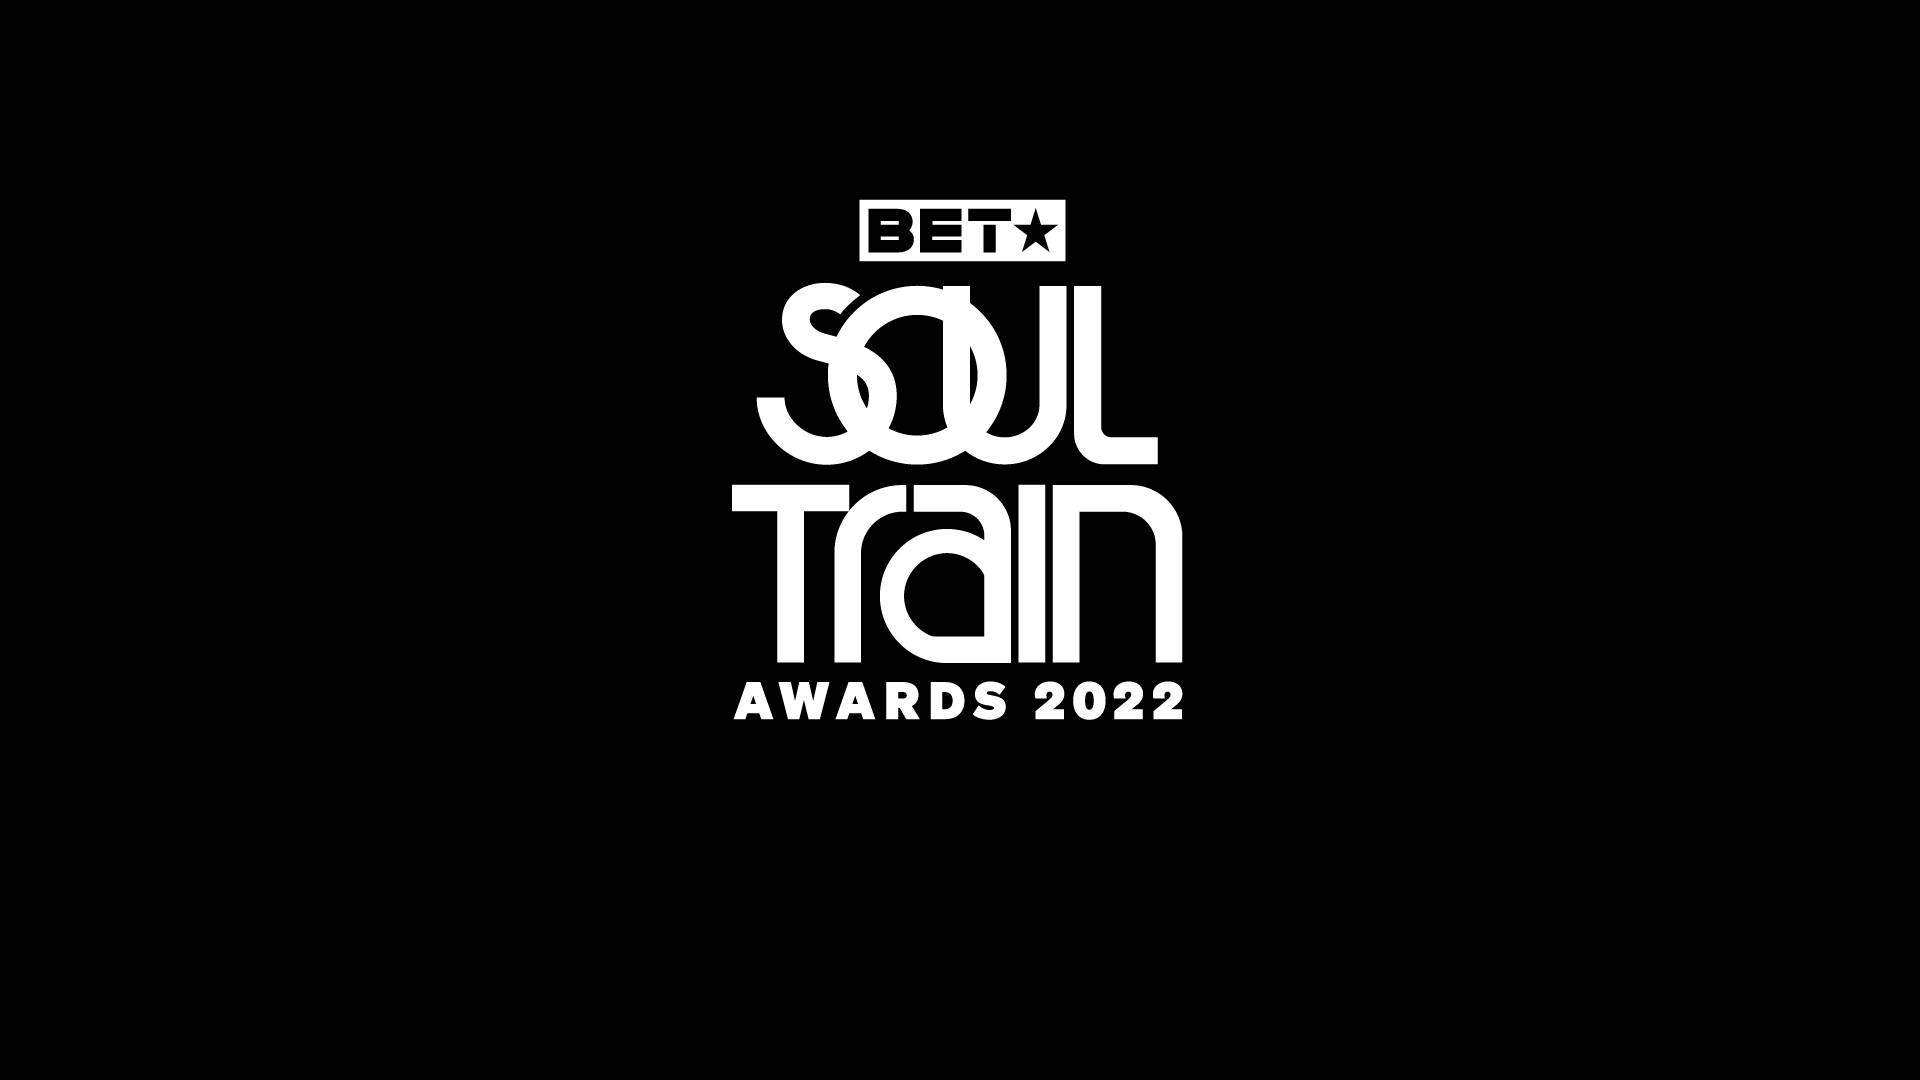 BET Announces New Air Date For 'Soul Train Awards' 2022 News BET